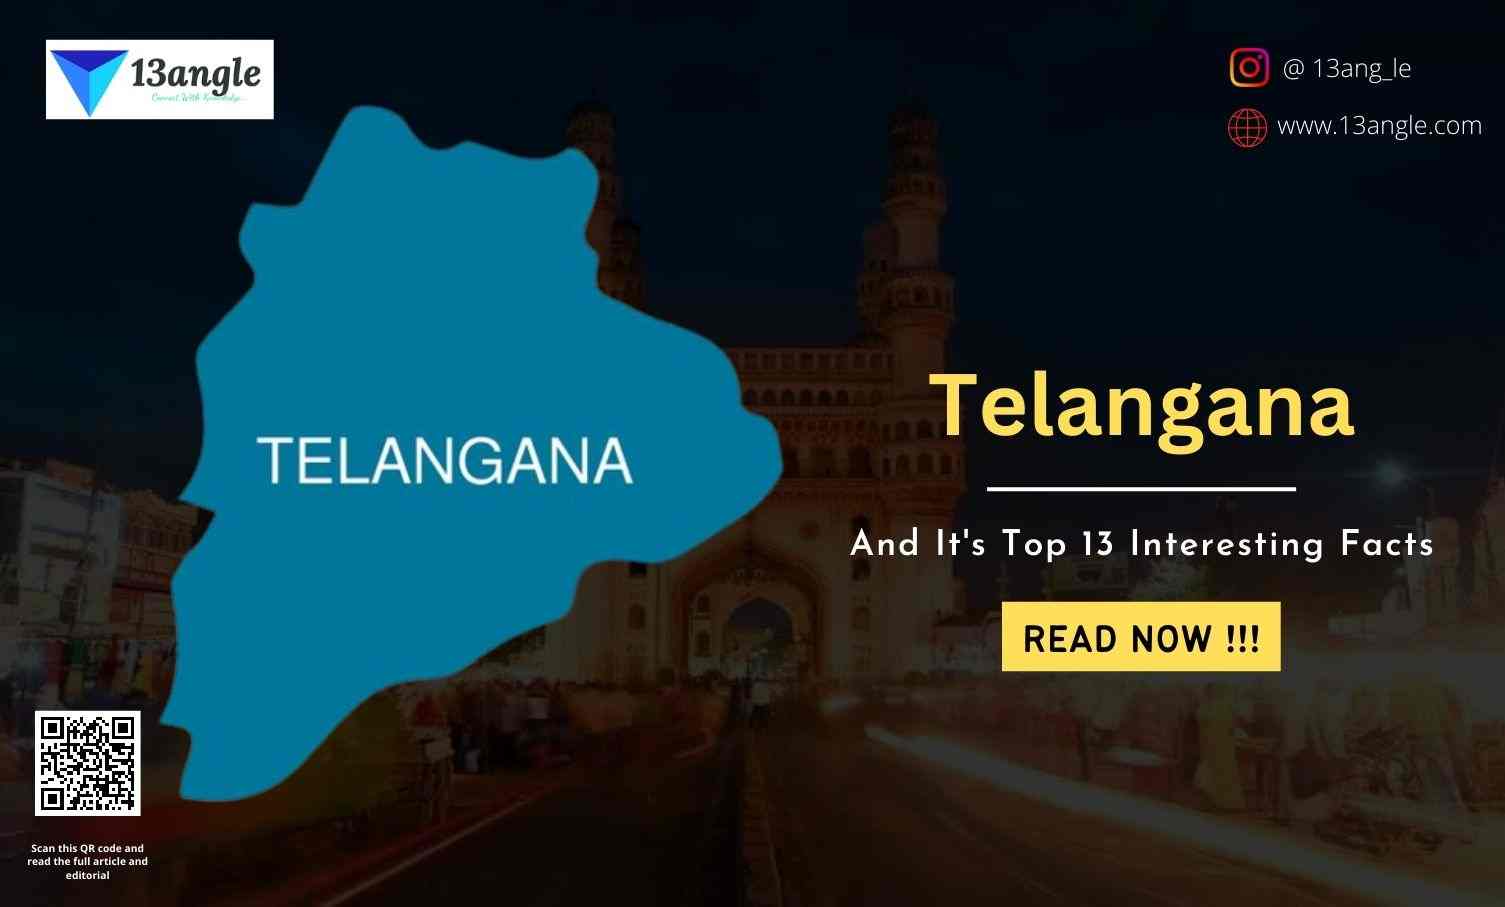 Telangana And It's Top 13 Interesting Facts- 13angle.com